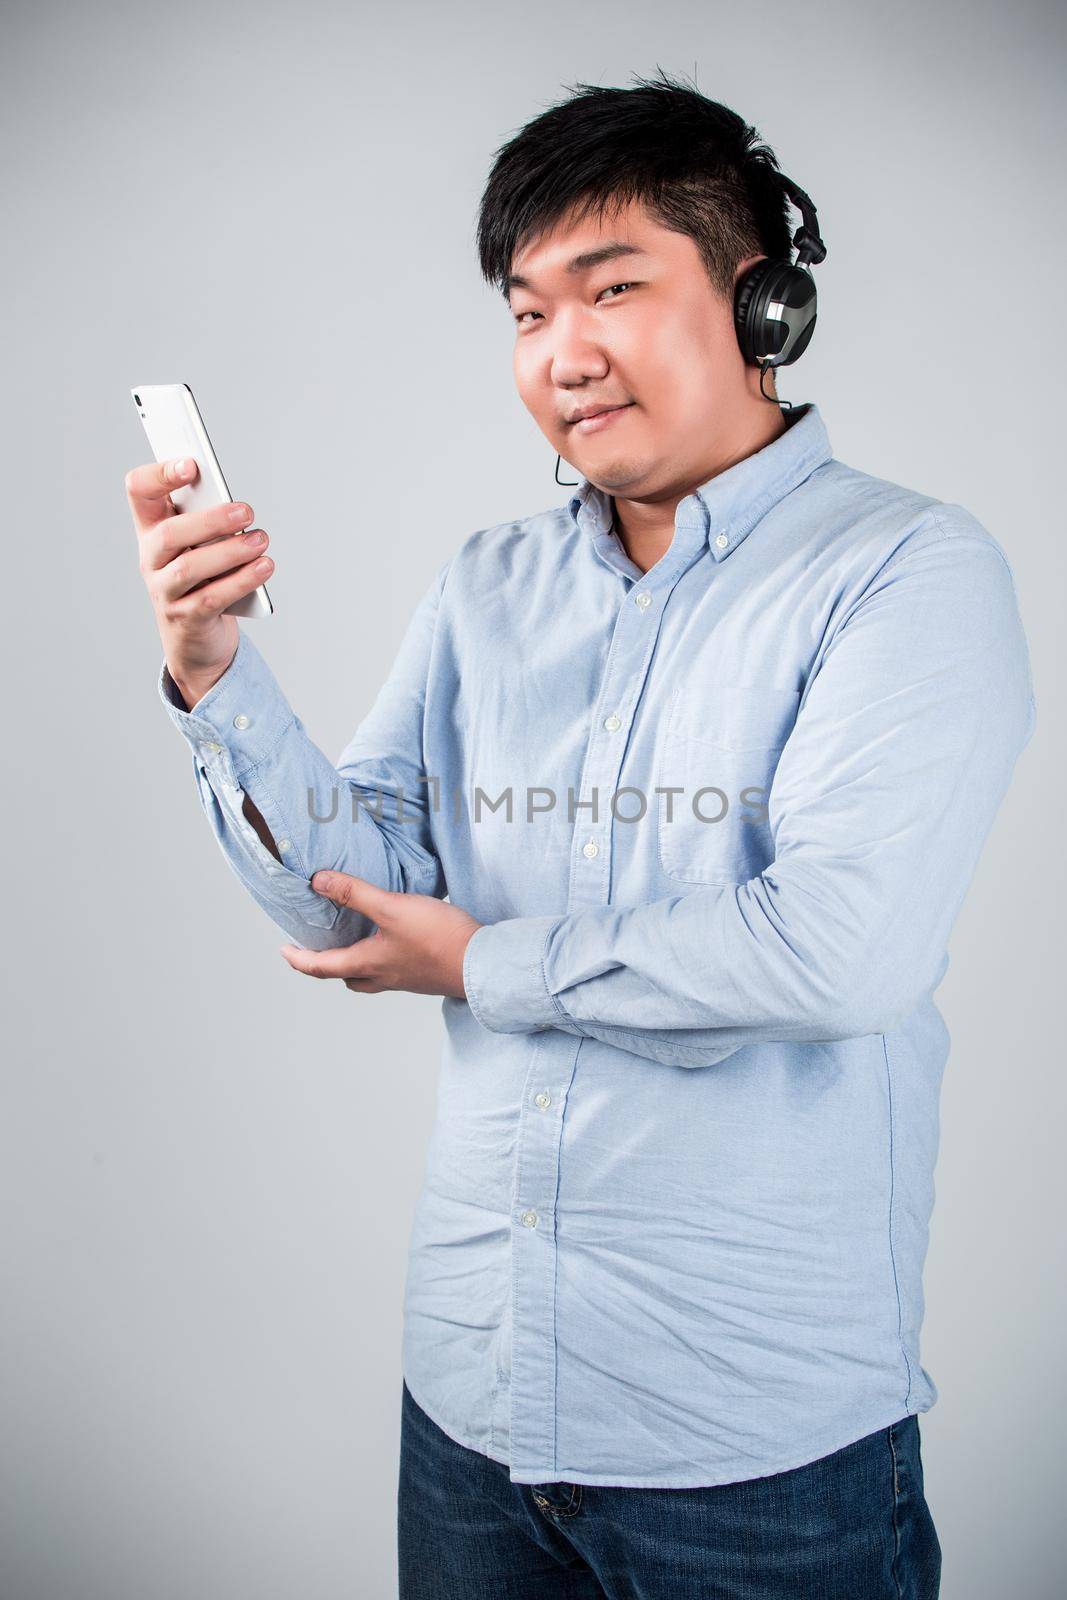 man in headphones holding mobile phone and smiling by whatwolf